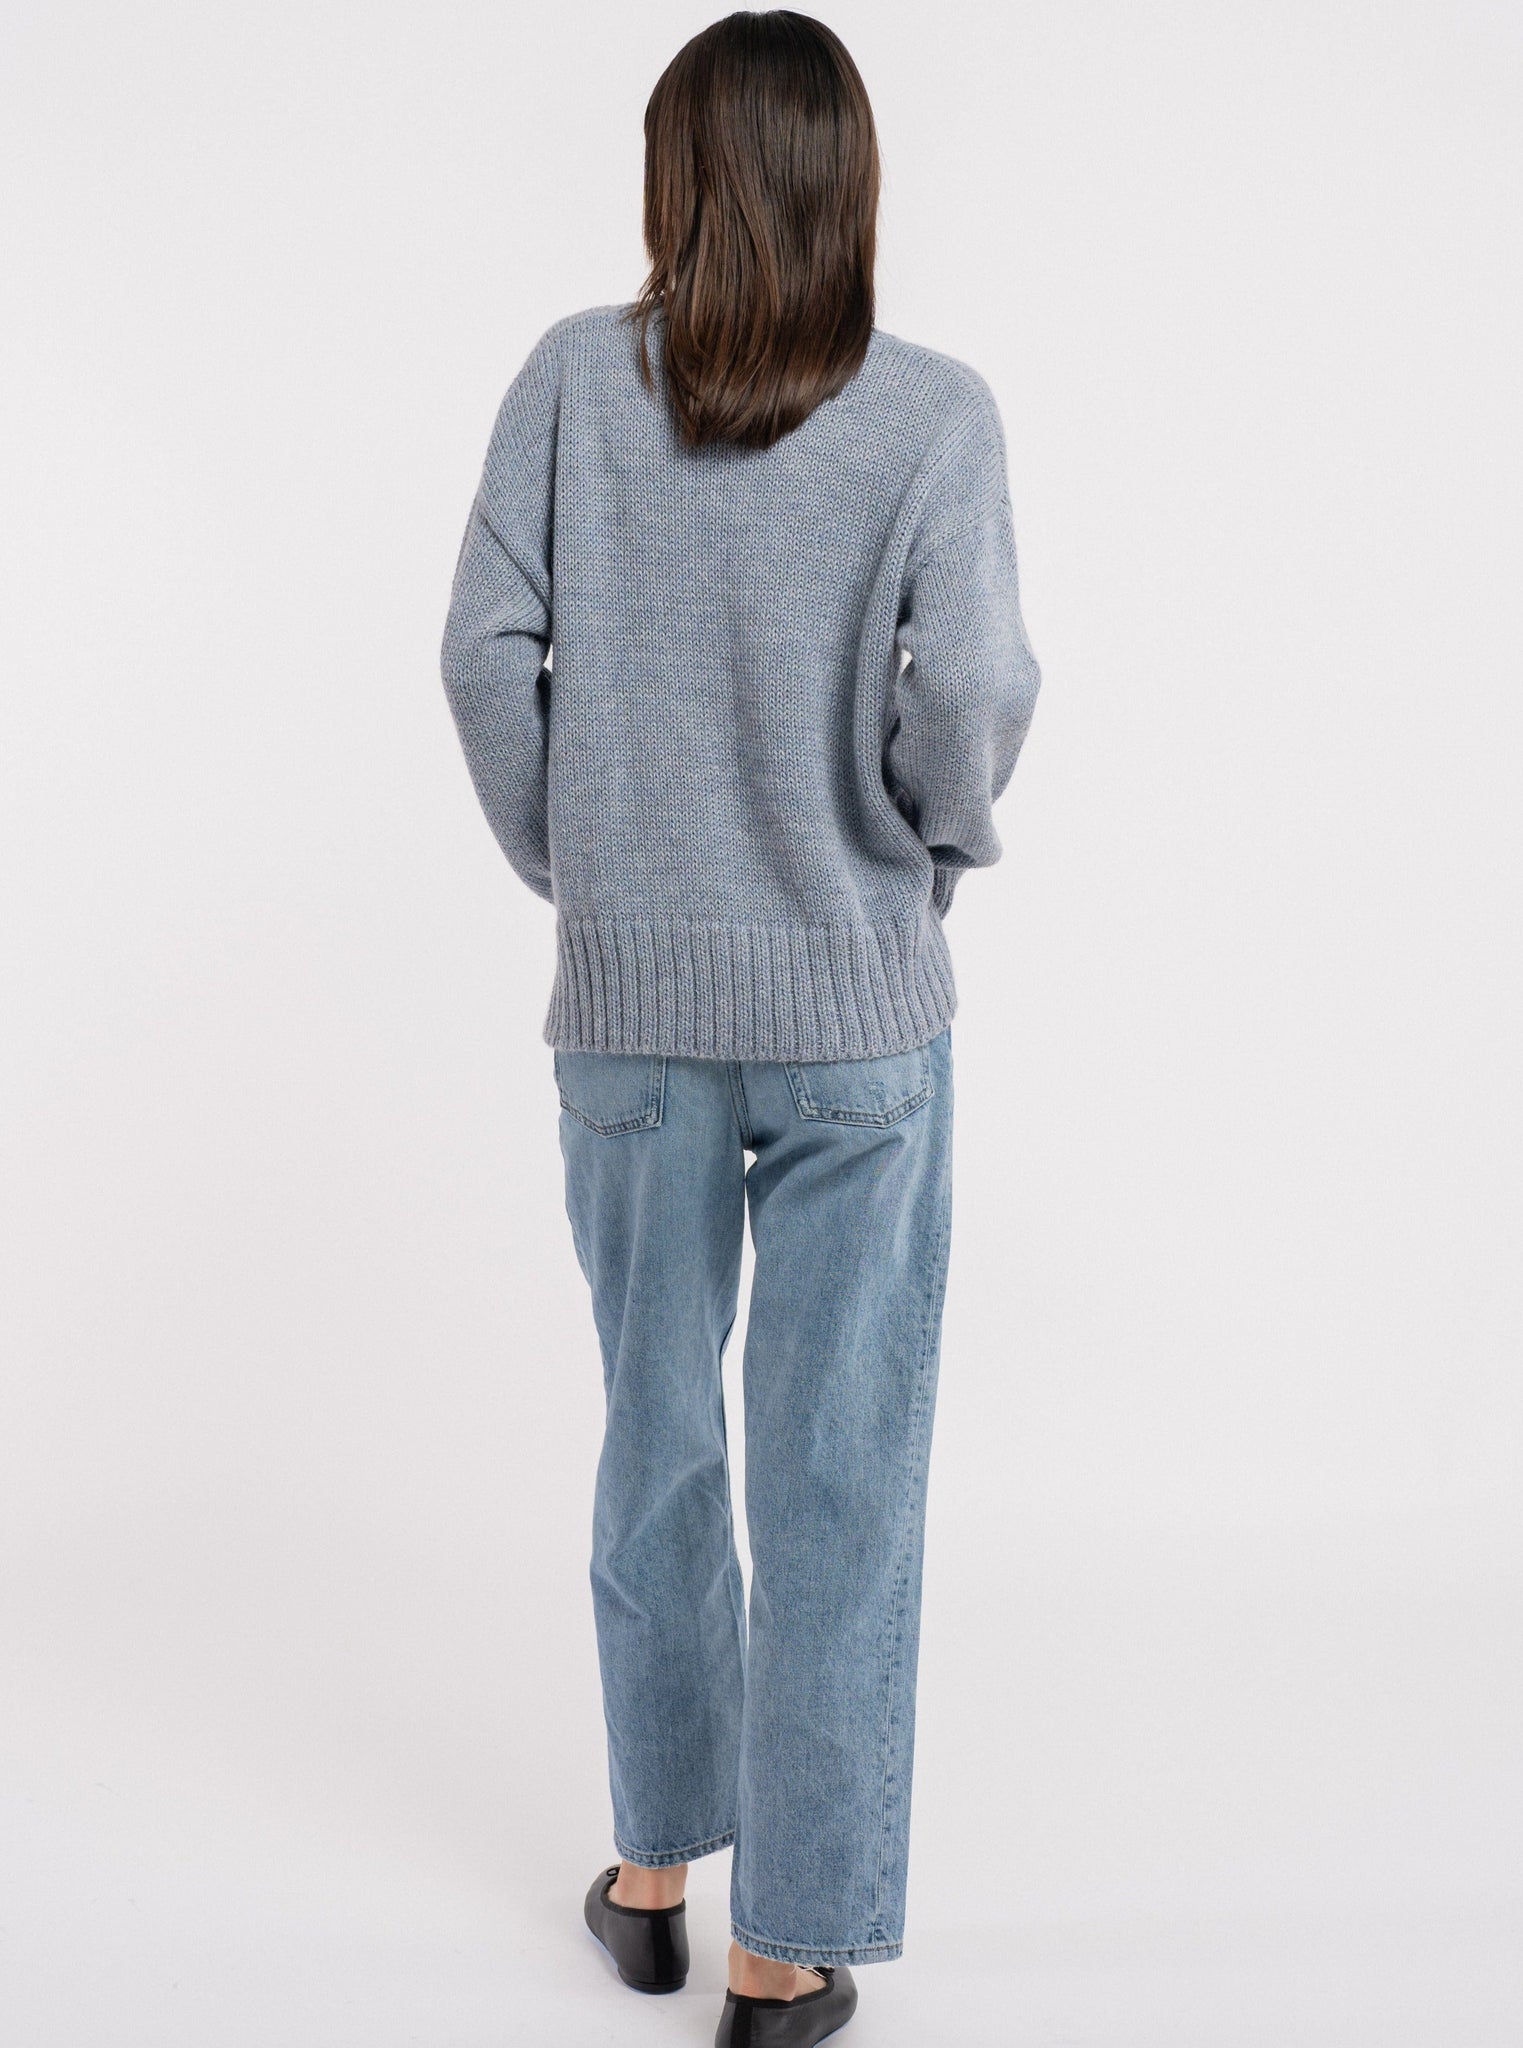 The back view of a woman wearing a cozy handmade Billy Sweater - Dusty Blue and jeans.